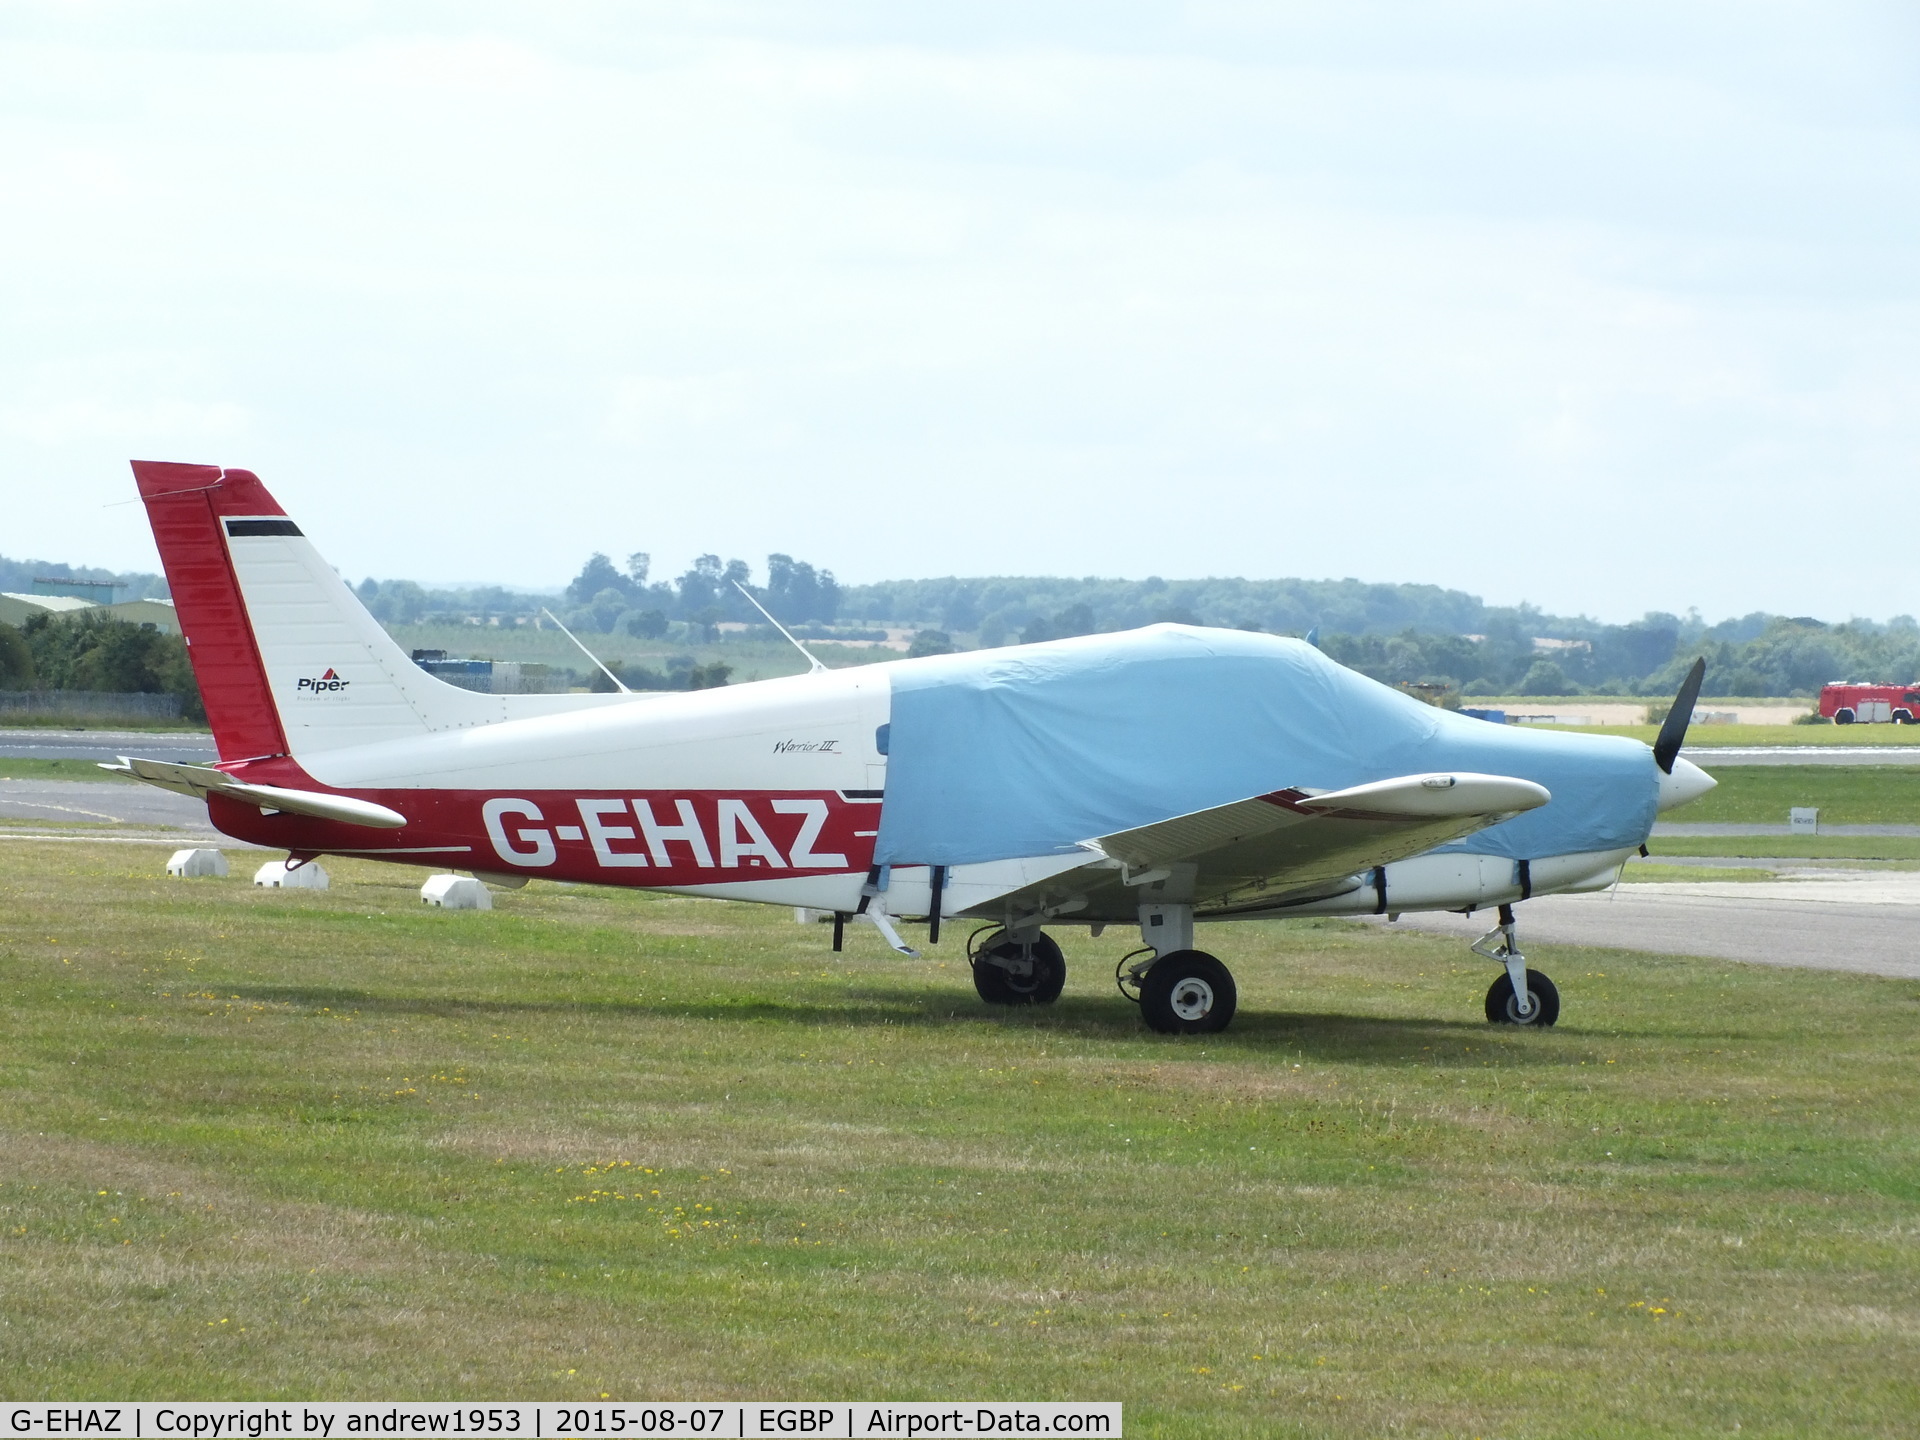 G-EHAZ, 2002 Piper PA-28-161 Warrior III C/N 2842168, G-EHAZ at Cotswold Airport.